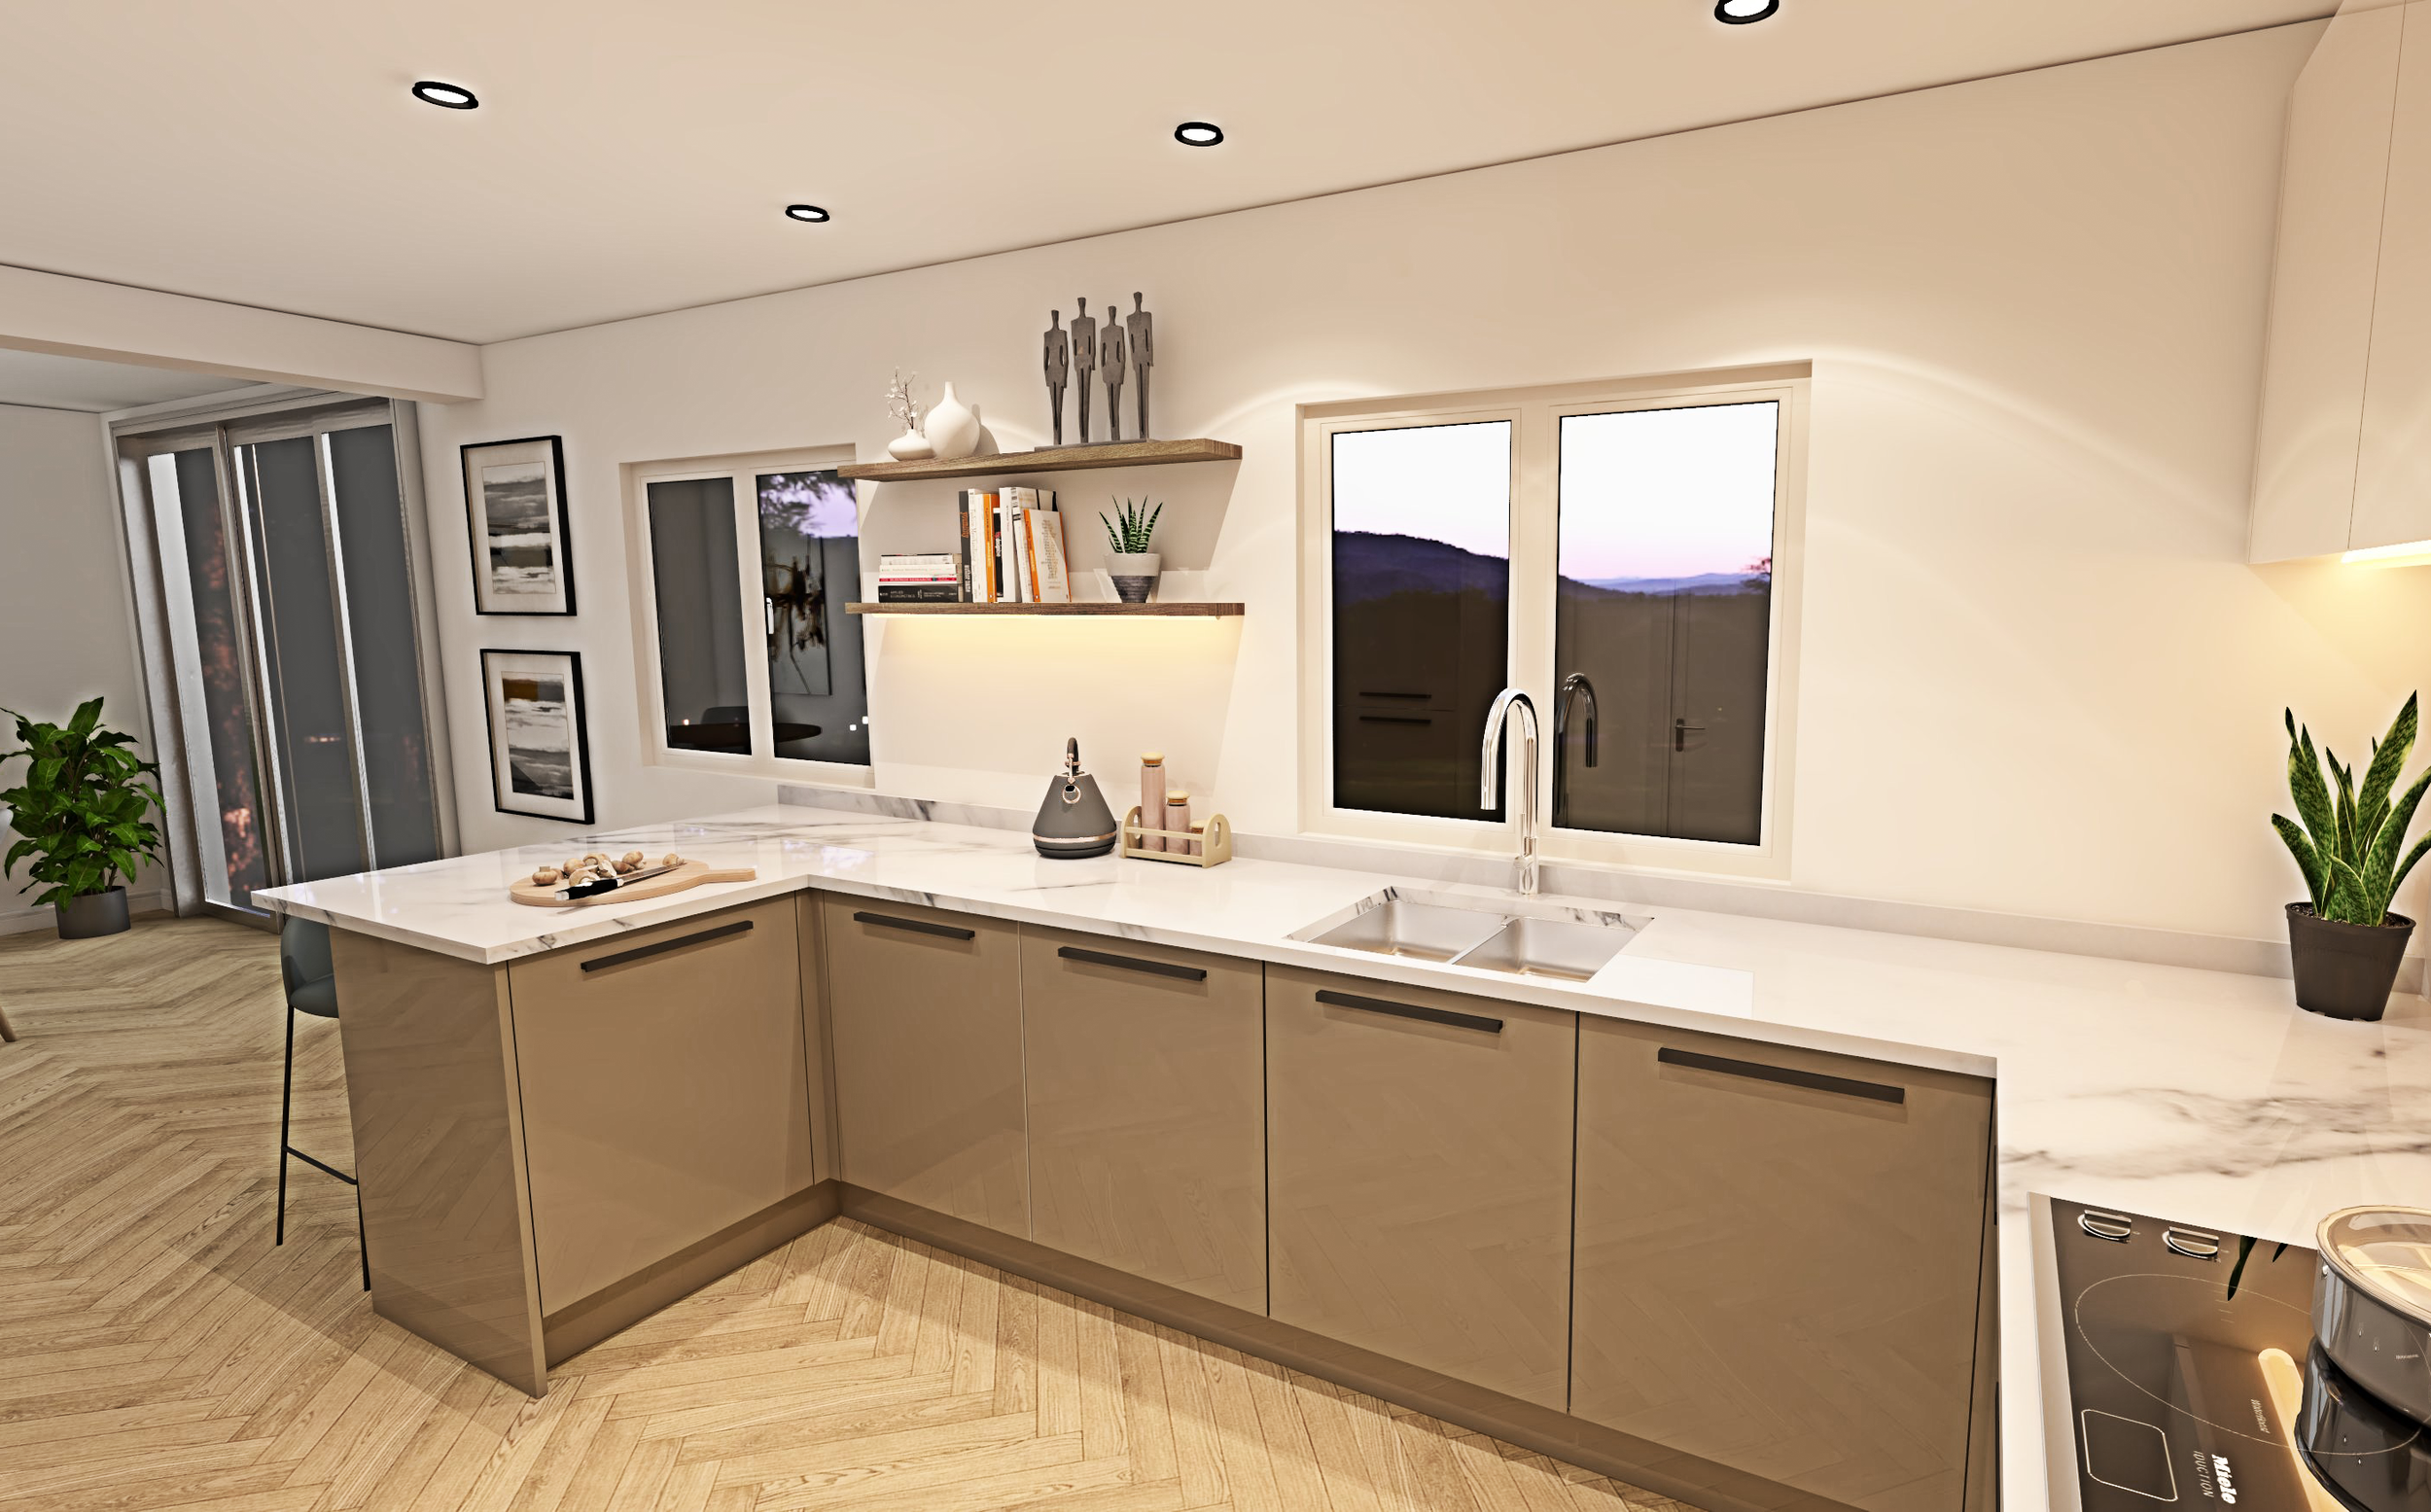 sarah_cowley_kitchen_view_9.effectsResult.png